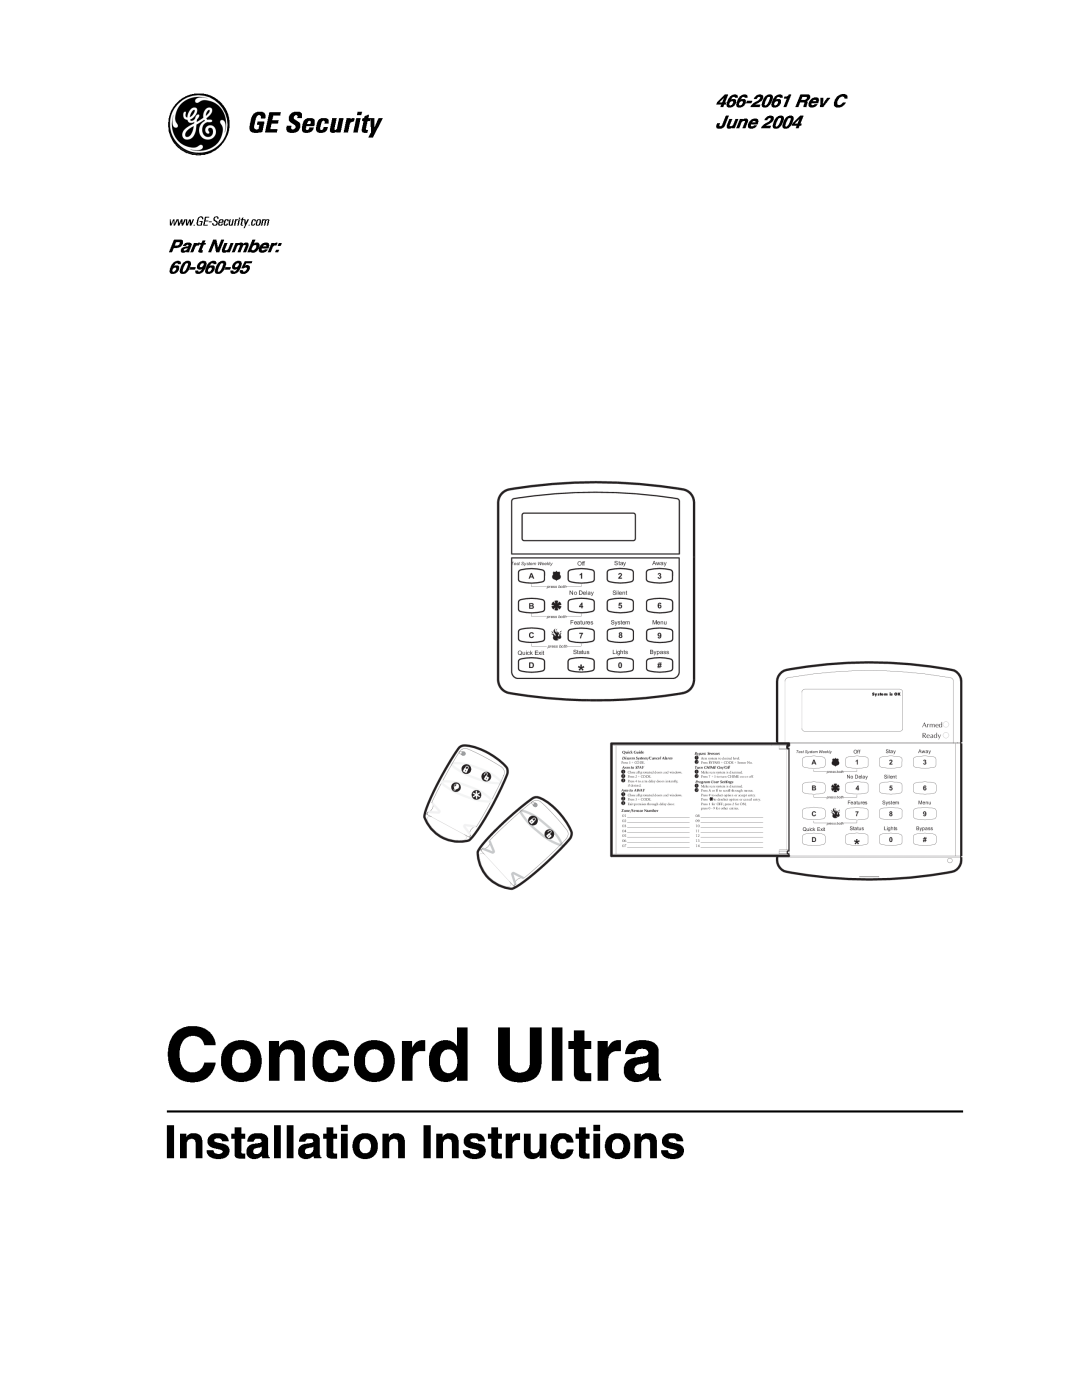 GE 60-960-95 installation instructions Concord Ultra, Installation Instructions, 6HFXULW, 466-2061Rev C, June, Part Number 